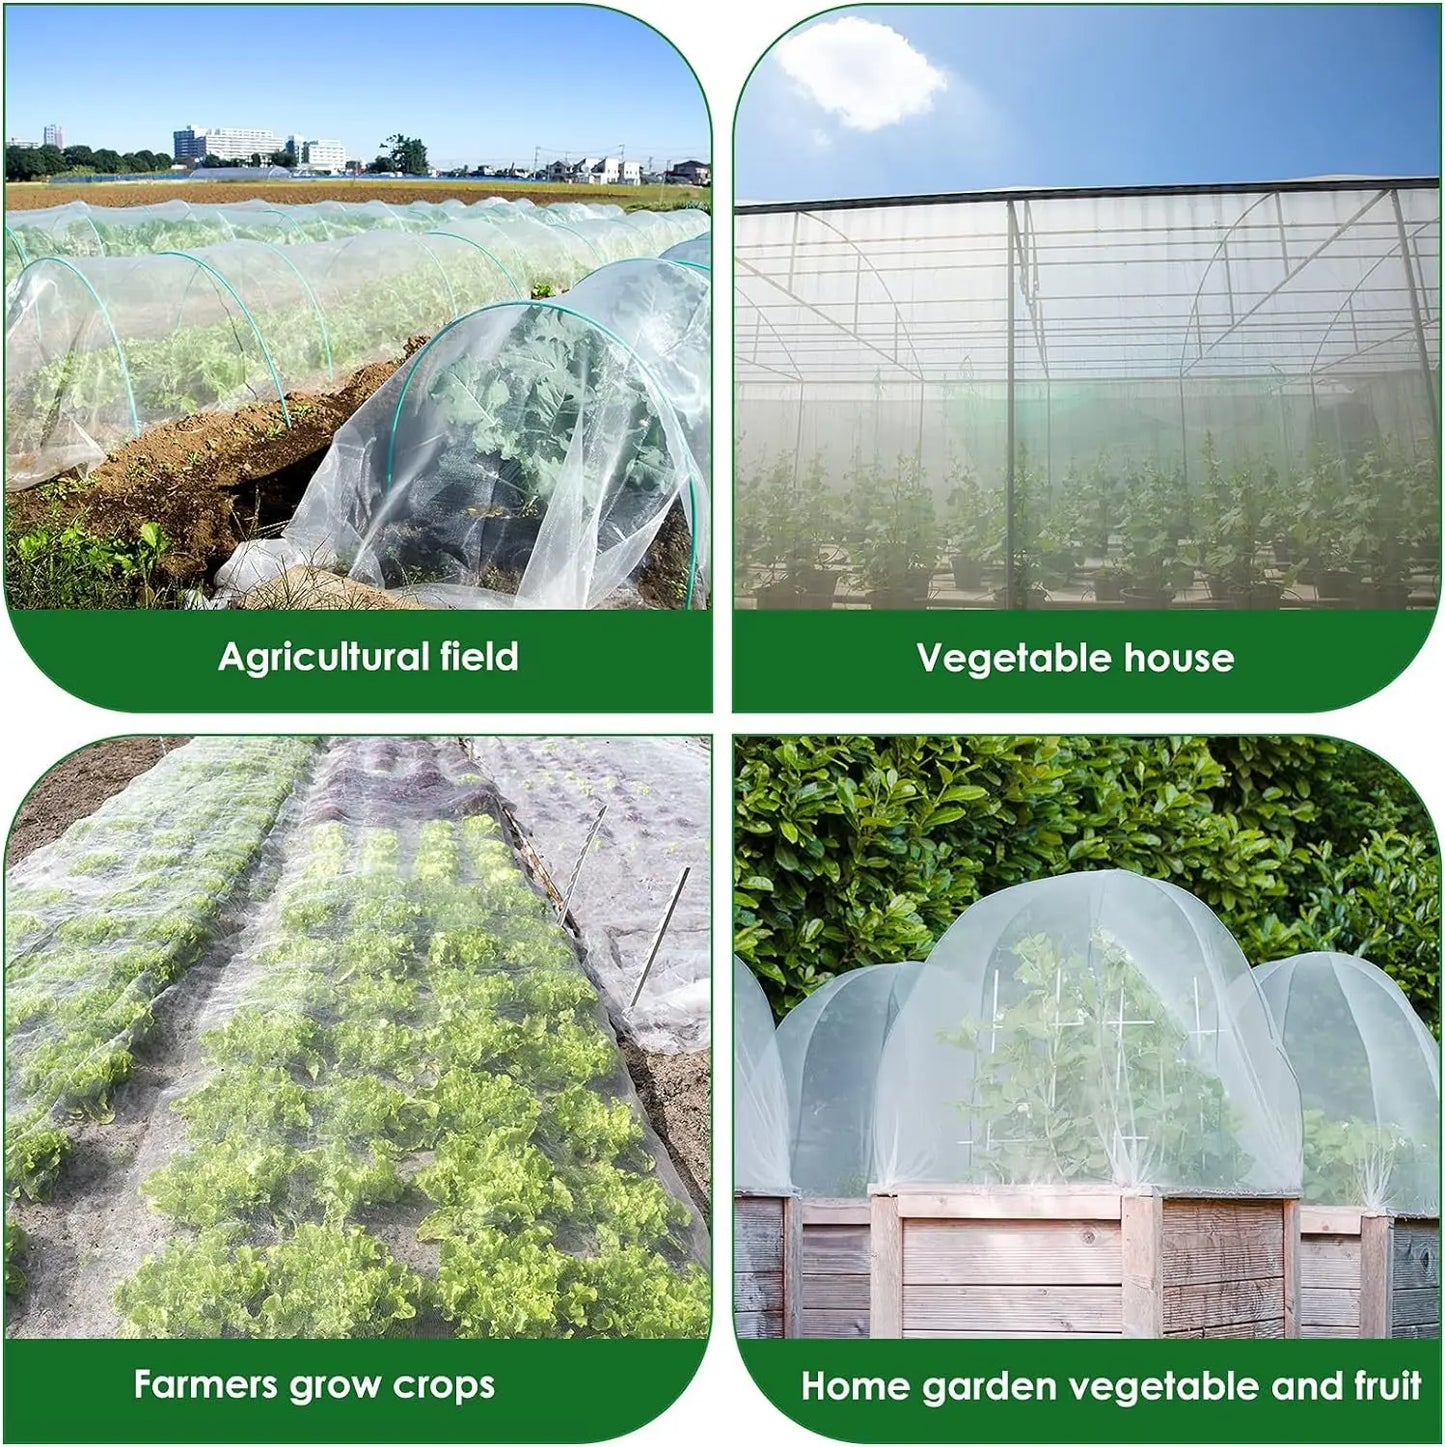 Vegetables Plant Insect Protection Net Garden Fruit Care Cover Flowers Greenhouse Protective Net Pest Control Anti-Bird 60 Meshs